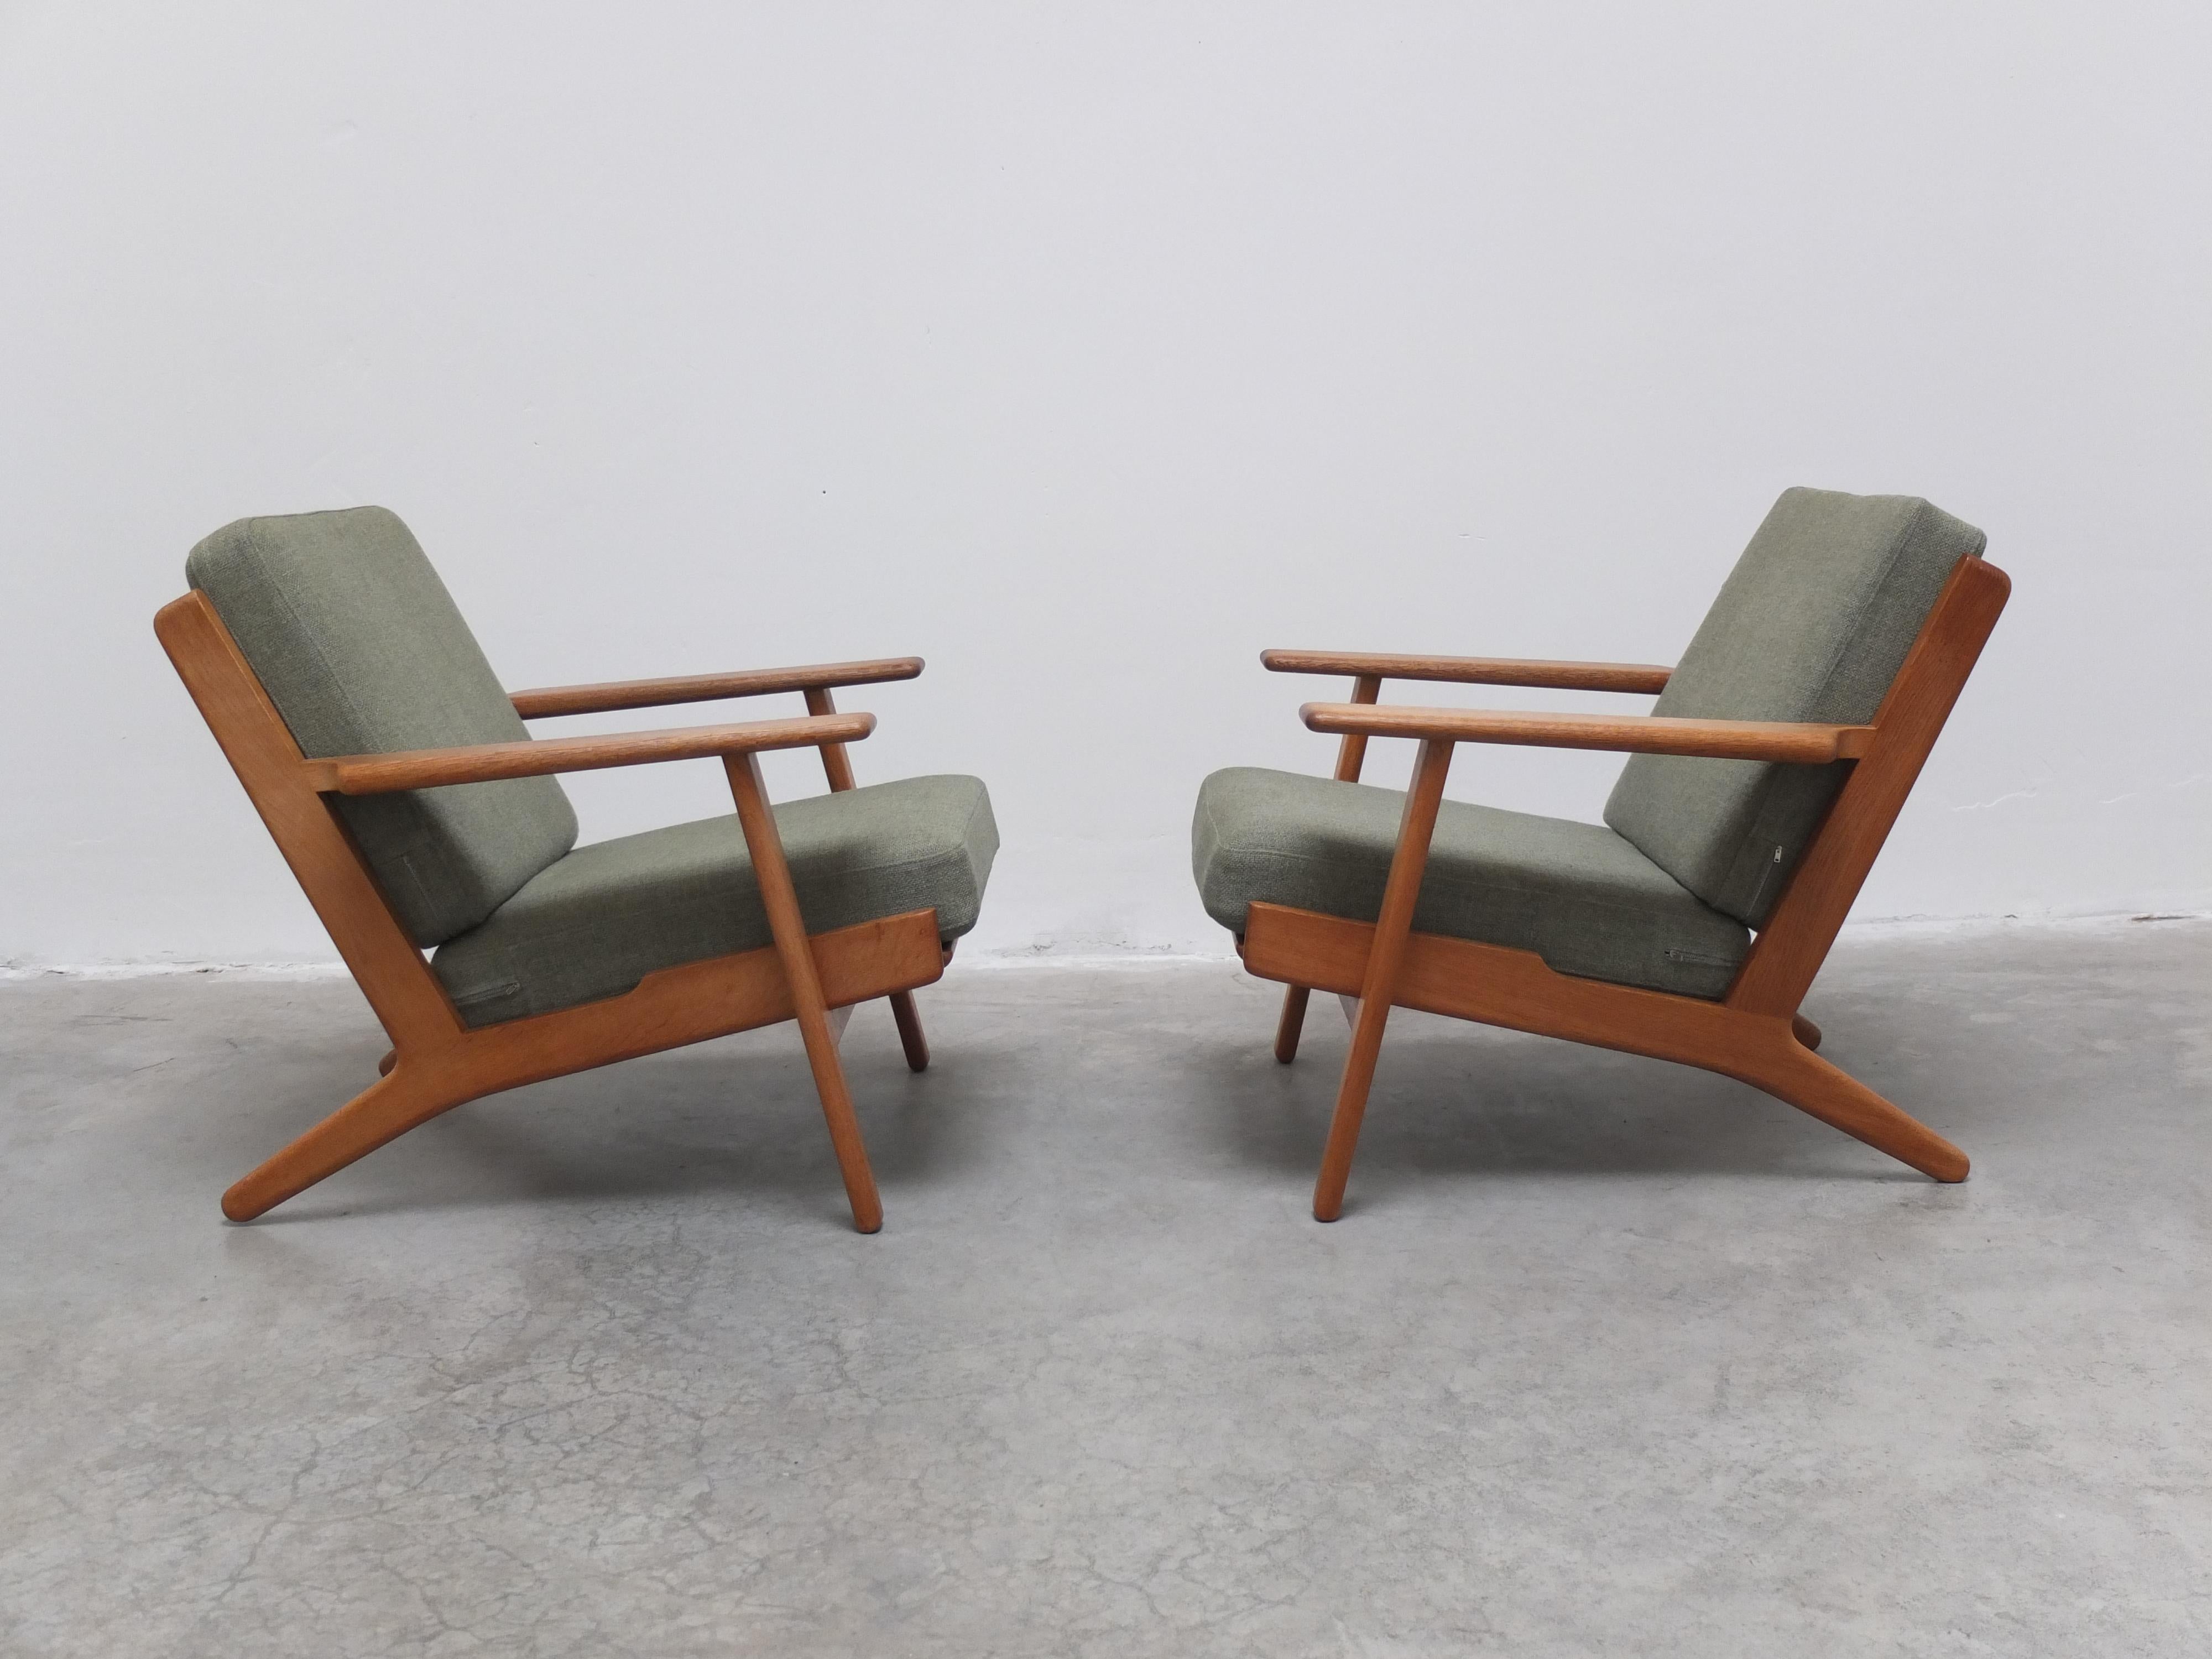 Early Pair of Oak 'GE-290' Lounge Chairs by Hans Wegner for Getama, 1953 For Sale 1